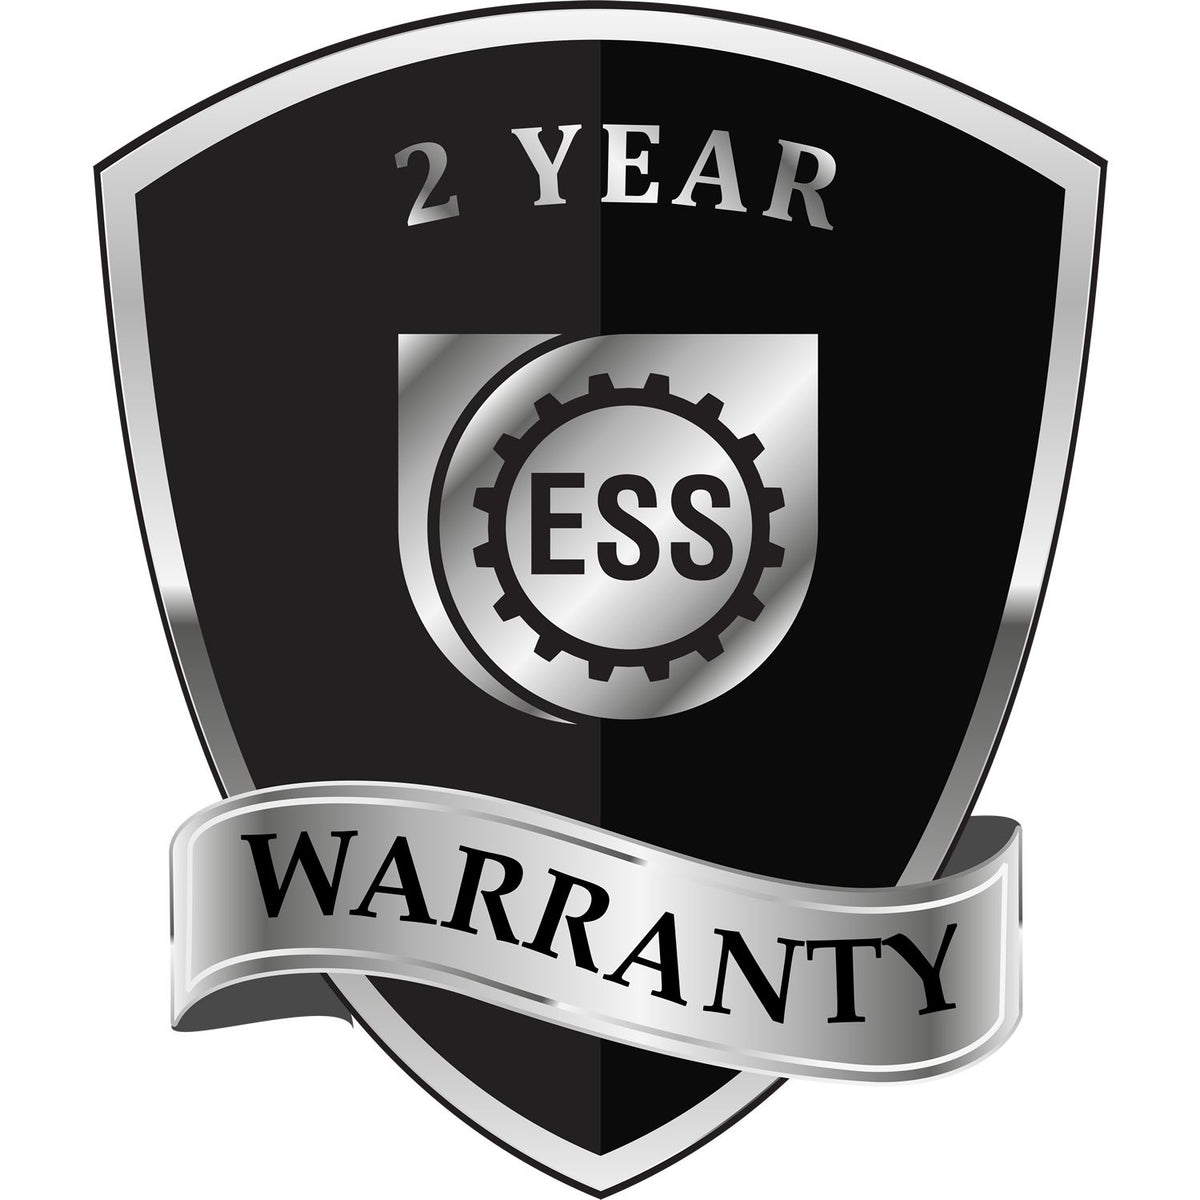 A badge or emblem showing a warranty icon for the Soft Tennessee Professional Engineer Seal